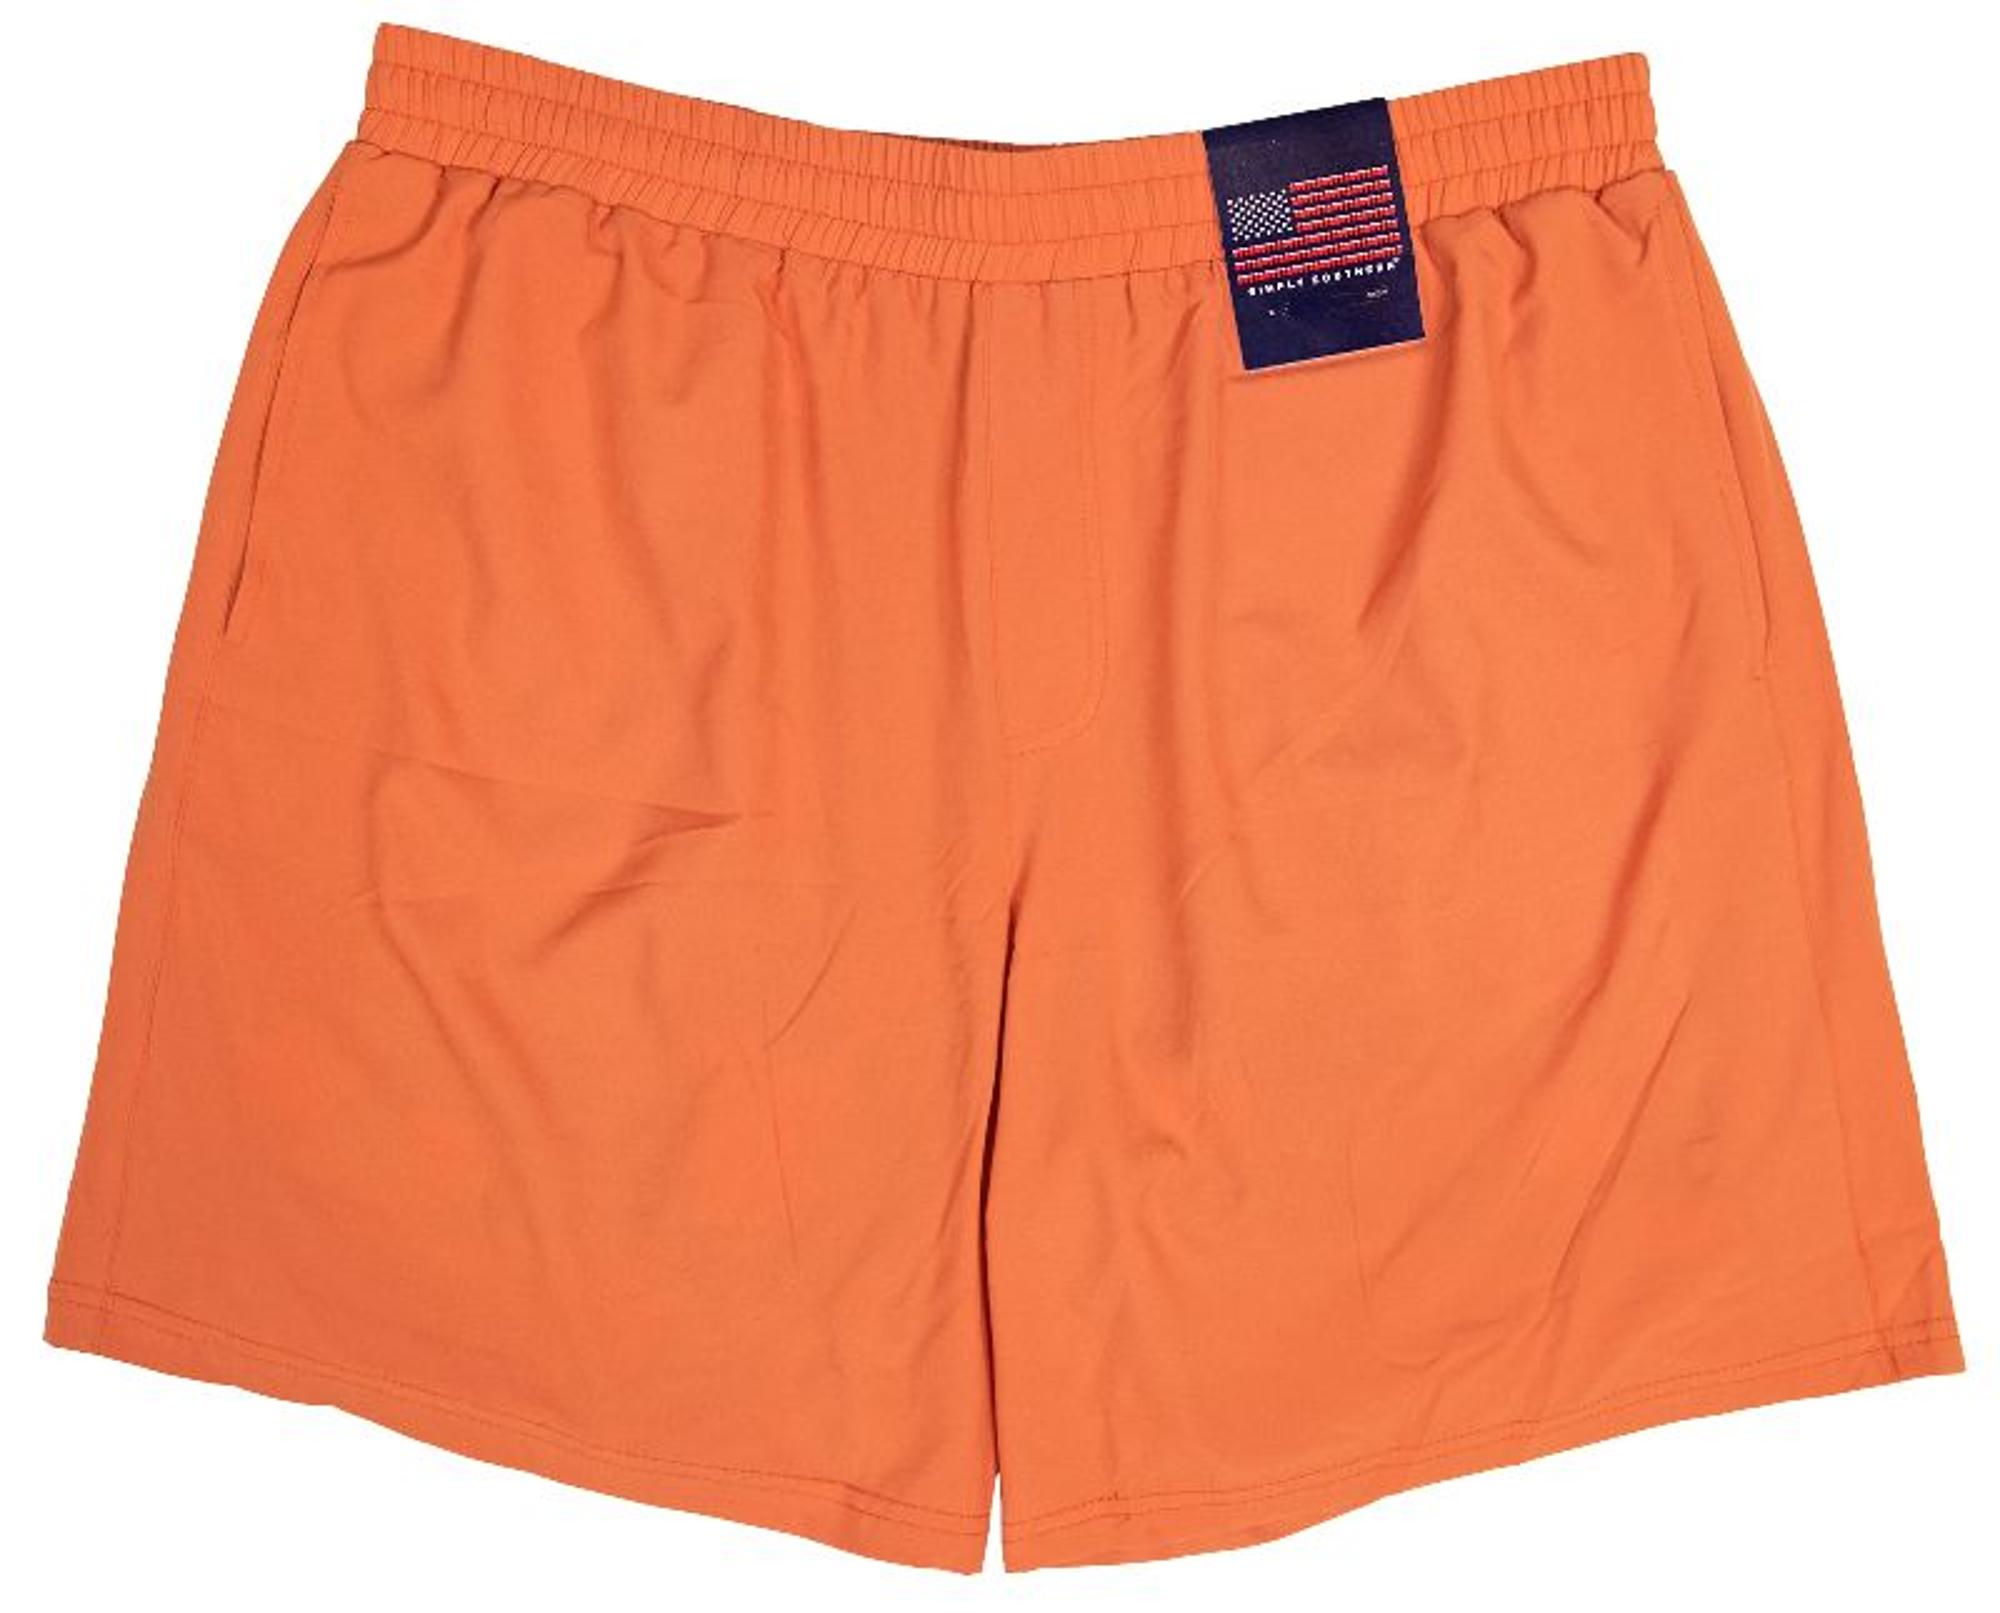 Lined Performance Shorts